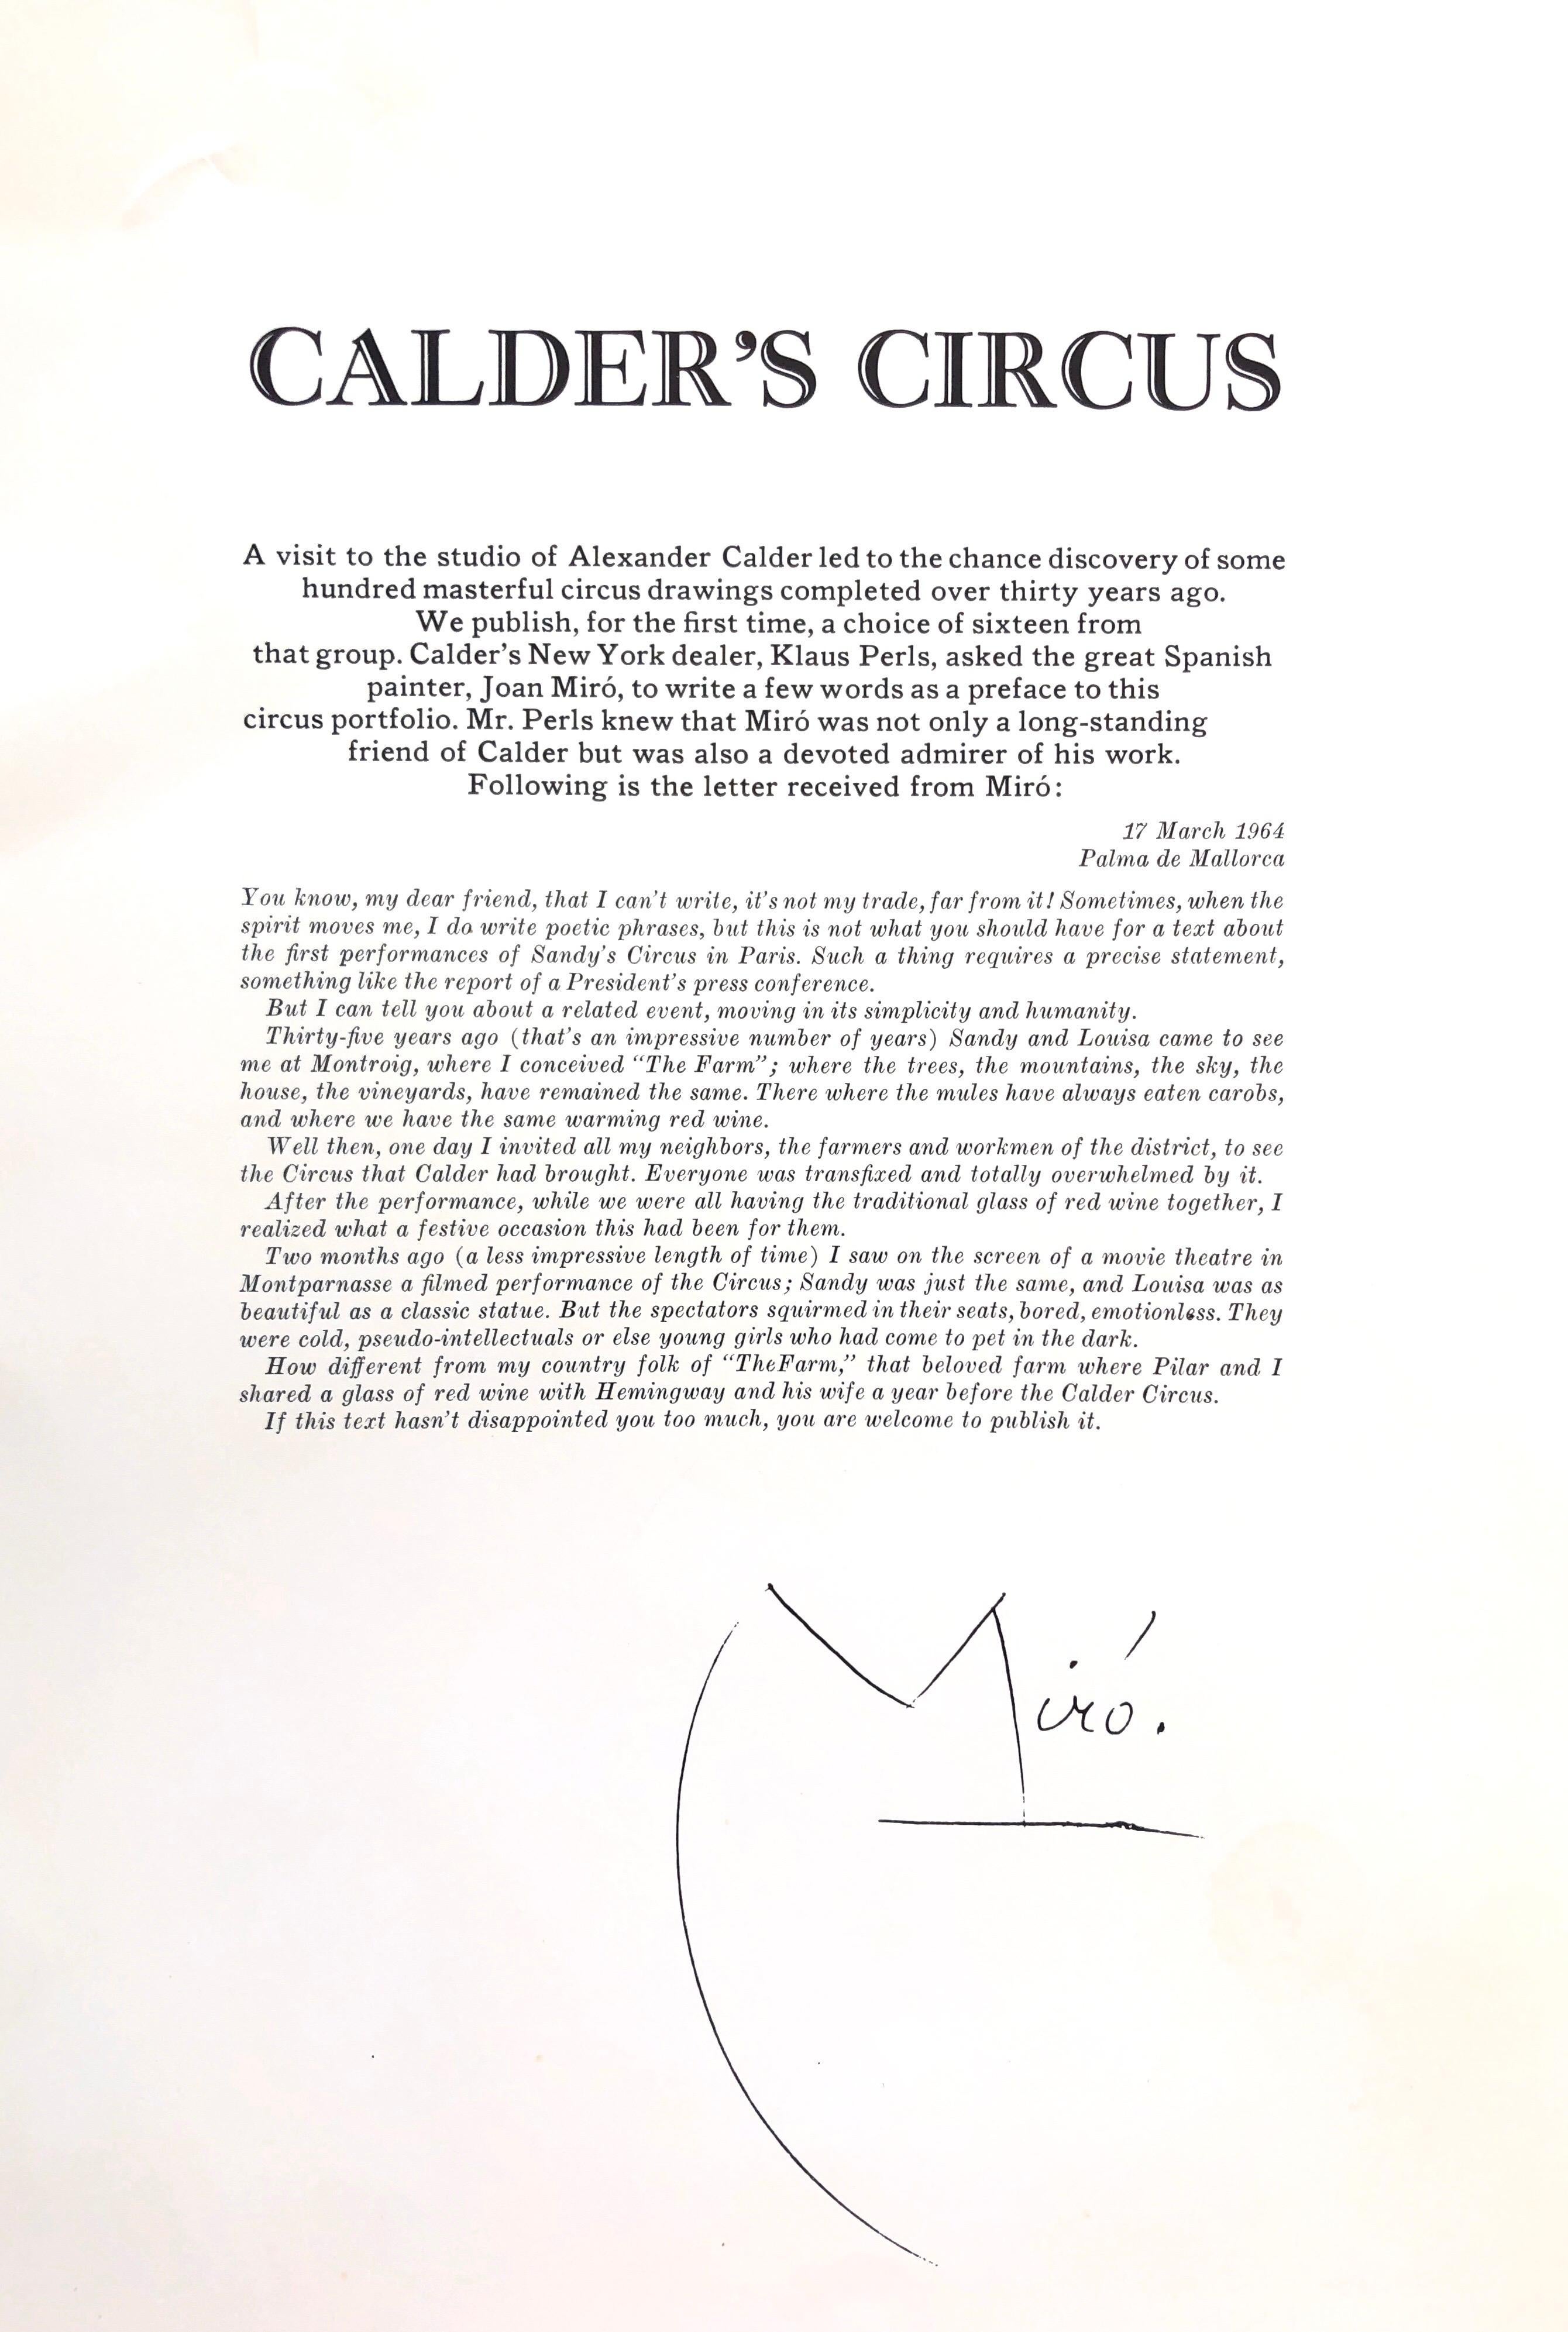 Alexander Calder Circus Reproduction Lithograph After a Drawing - Gray Animal Print by (after) Alexander Calder